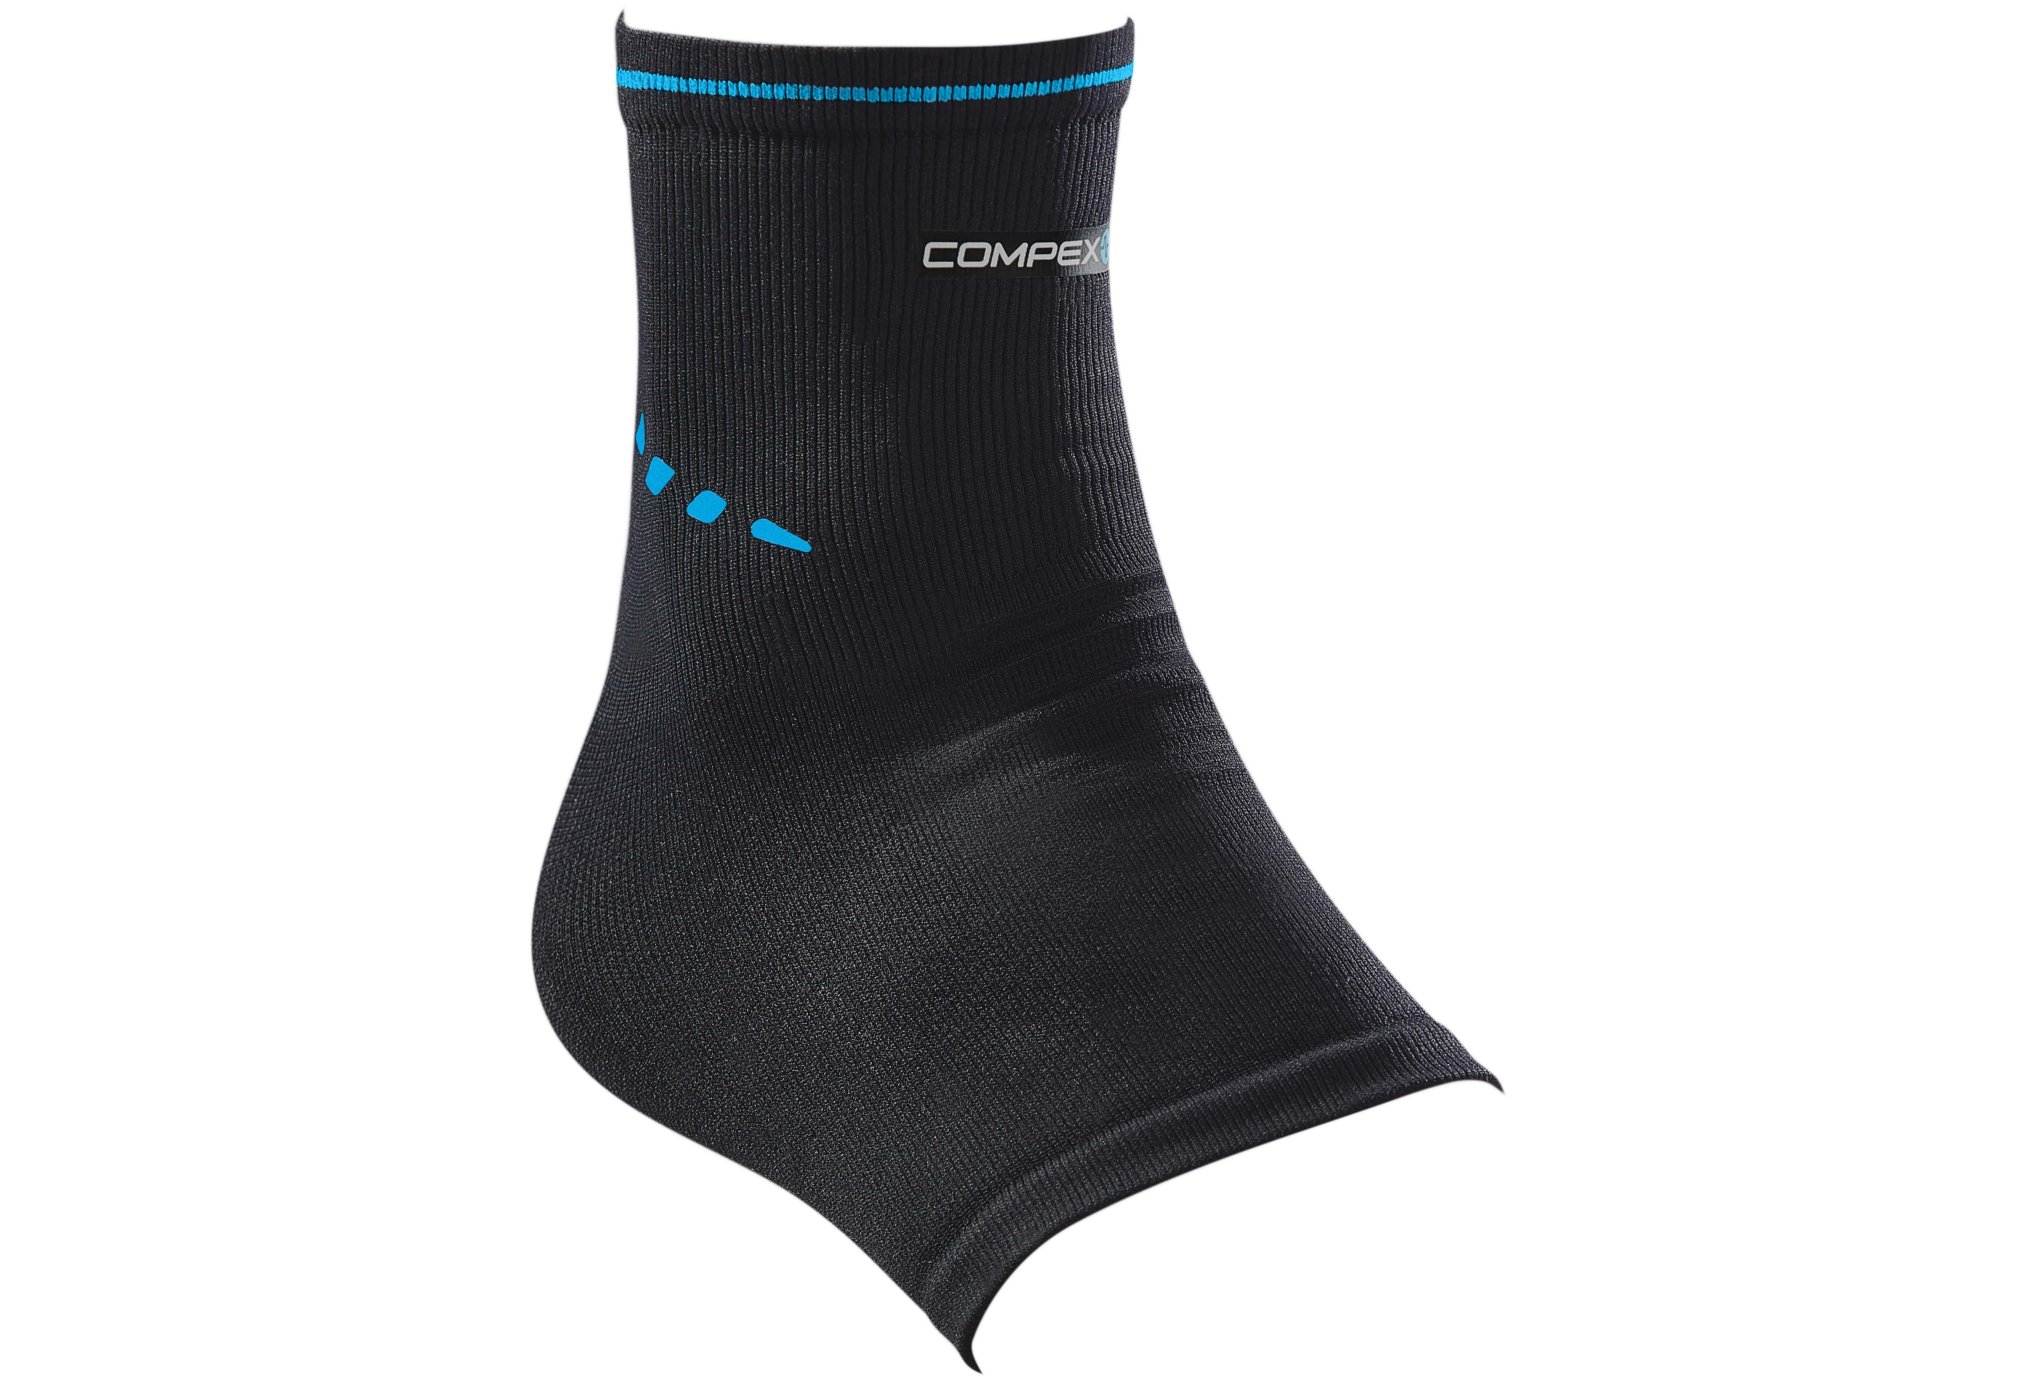 Compex Activ Ankle Protection musculaire & articulaire